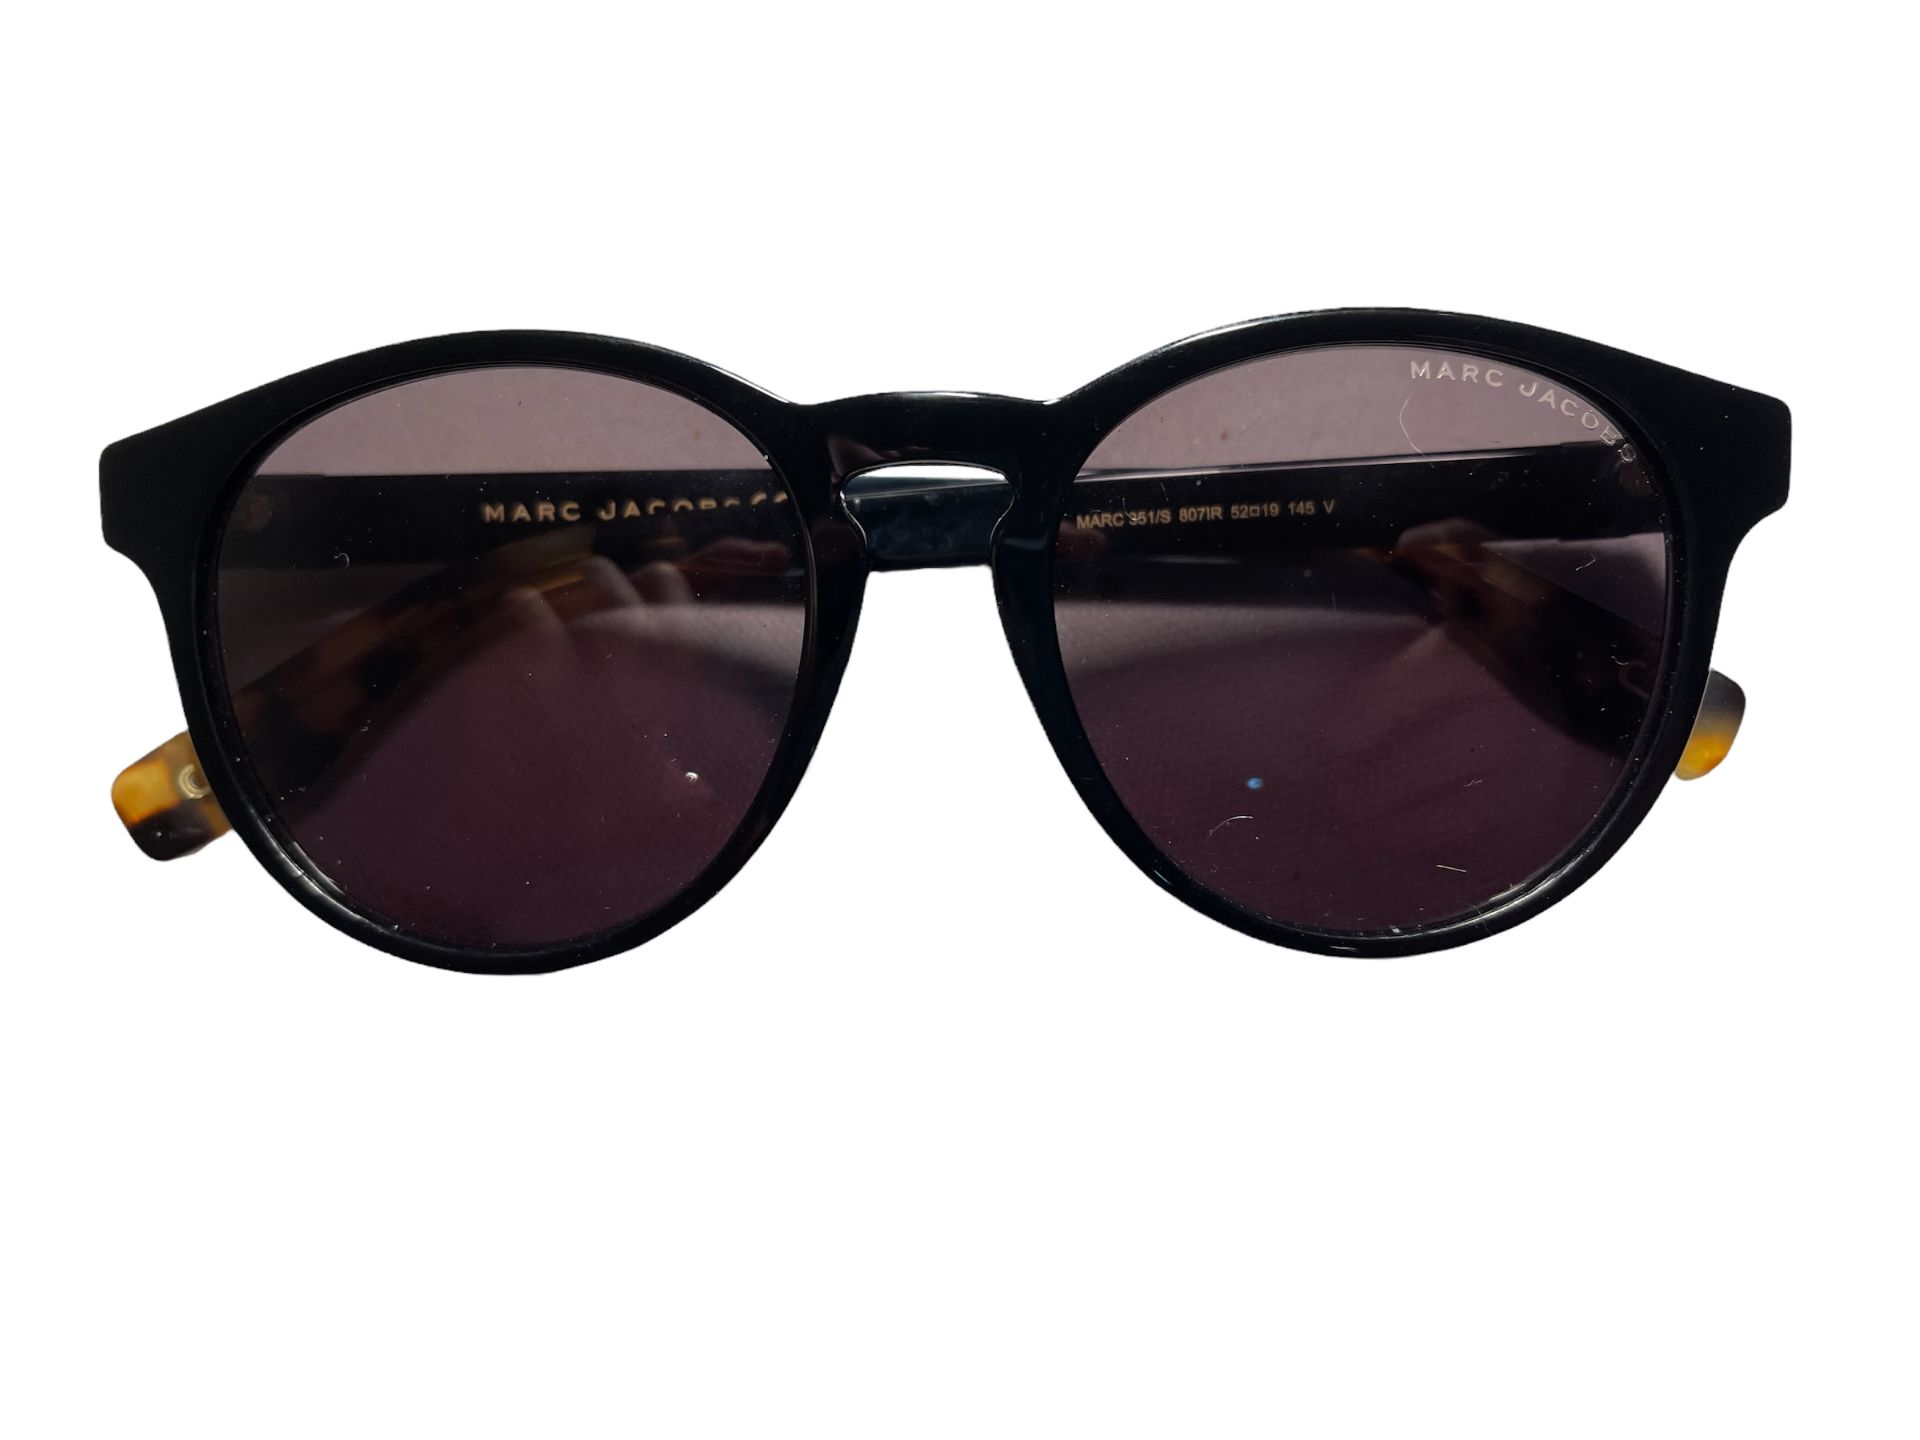 Marc Jacobs Ladies Sunglasses - Ex Demo or Surplus Stock from our Private Jet Charter - Image 5 of 10